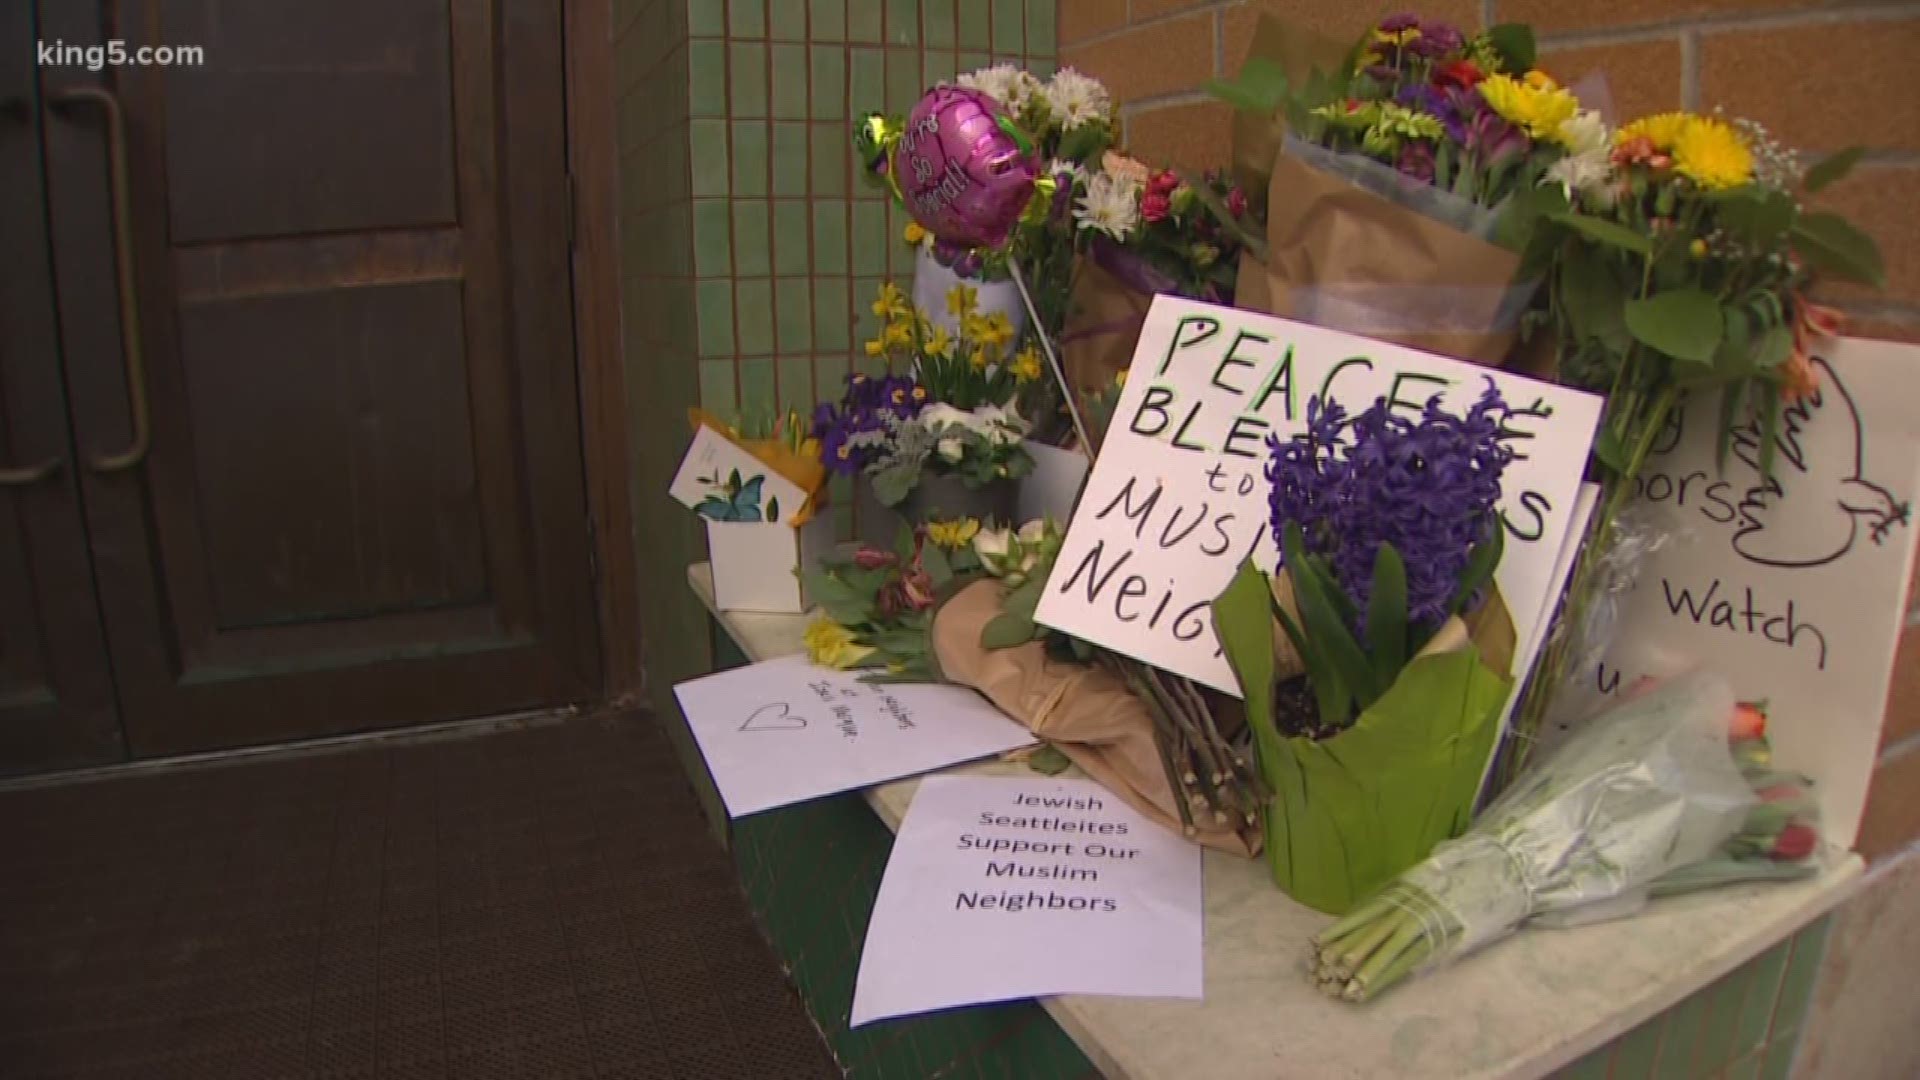 Interfaith support for Seattle's Muslim community after New Zealand terror attacks. KING 5's Natalie Swaby reports